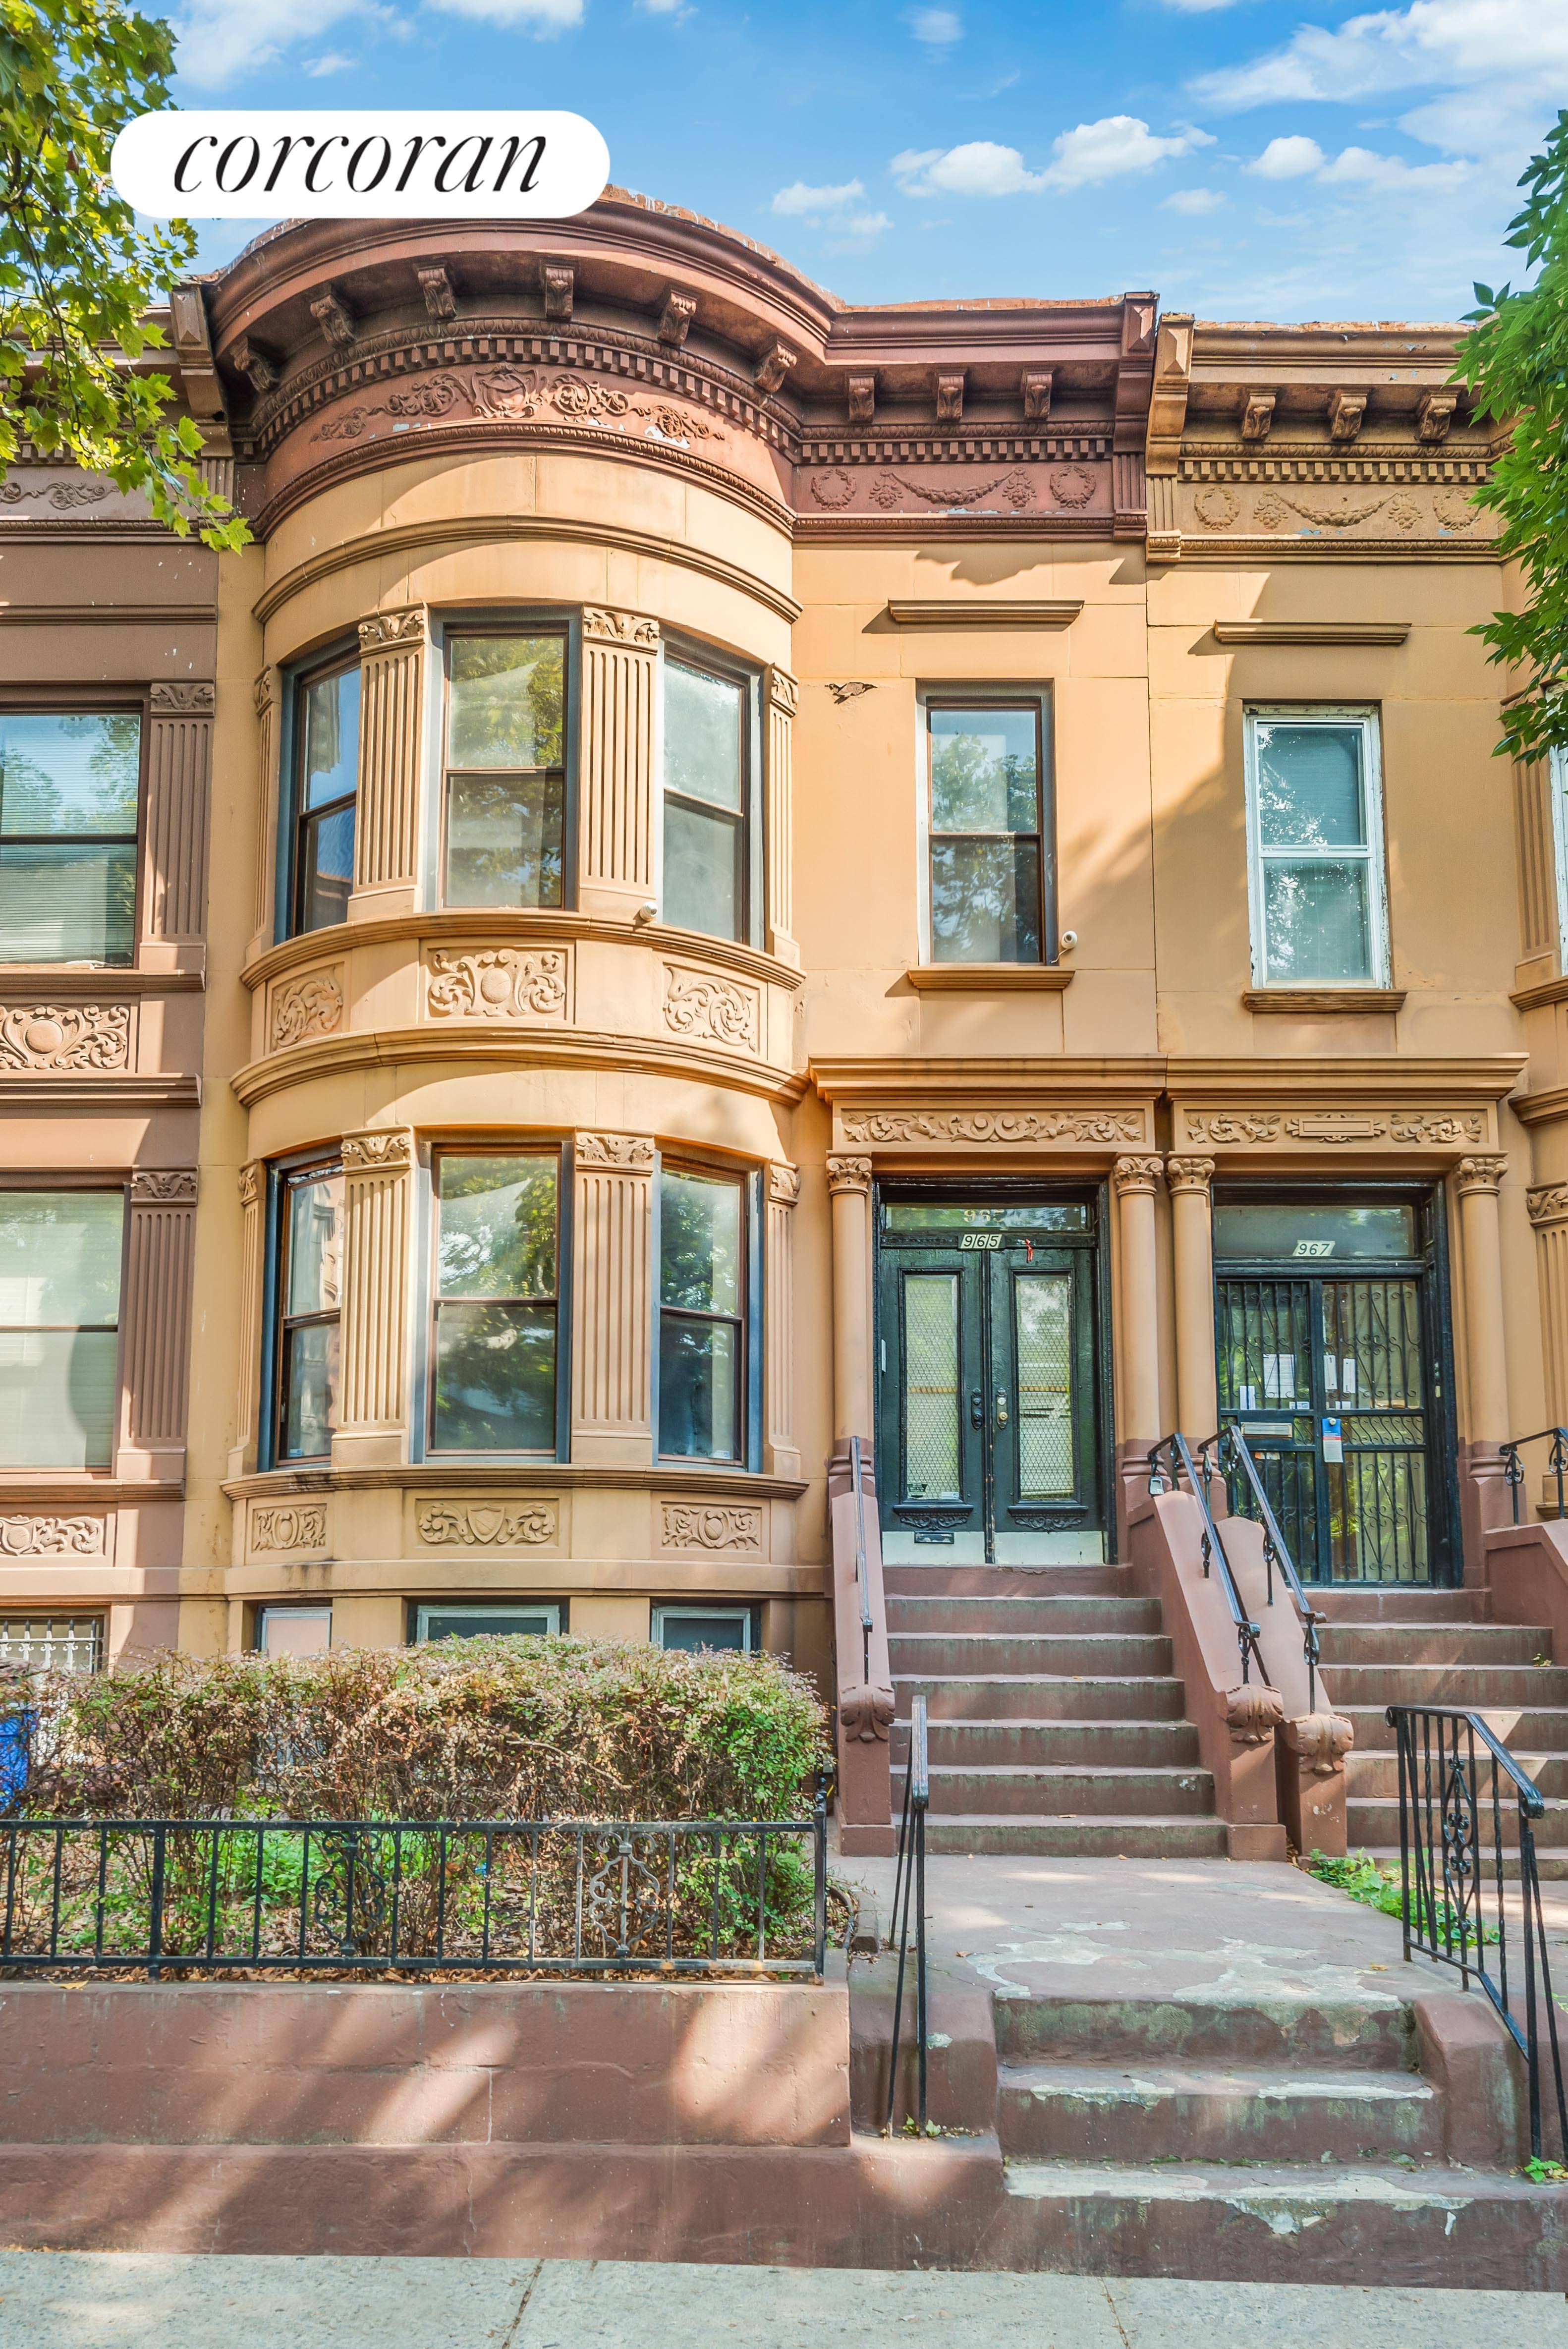 965 St Johns is a 3, 645 sq ft two family Brownstone, in the heart of Crown Heights North Historic District on a landmarked block, built 20' wide with barrel ...